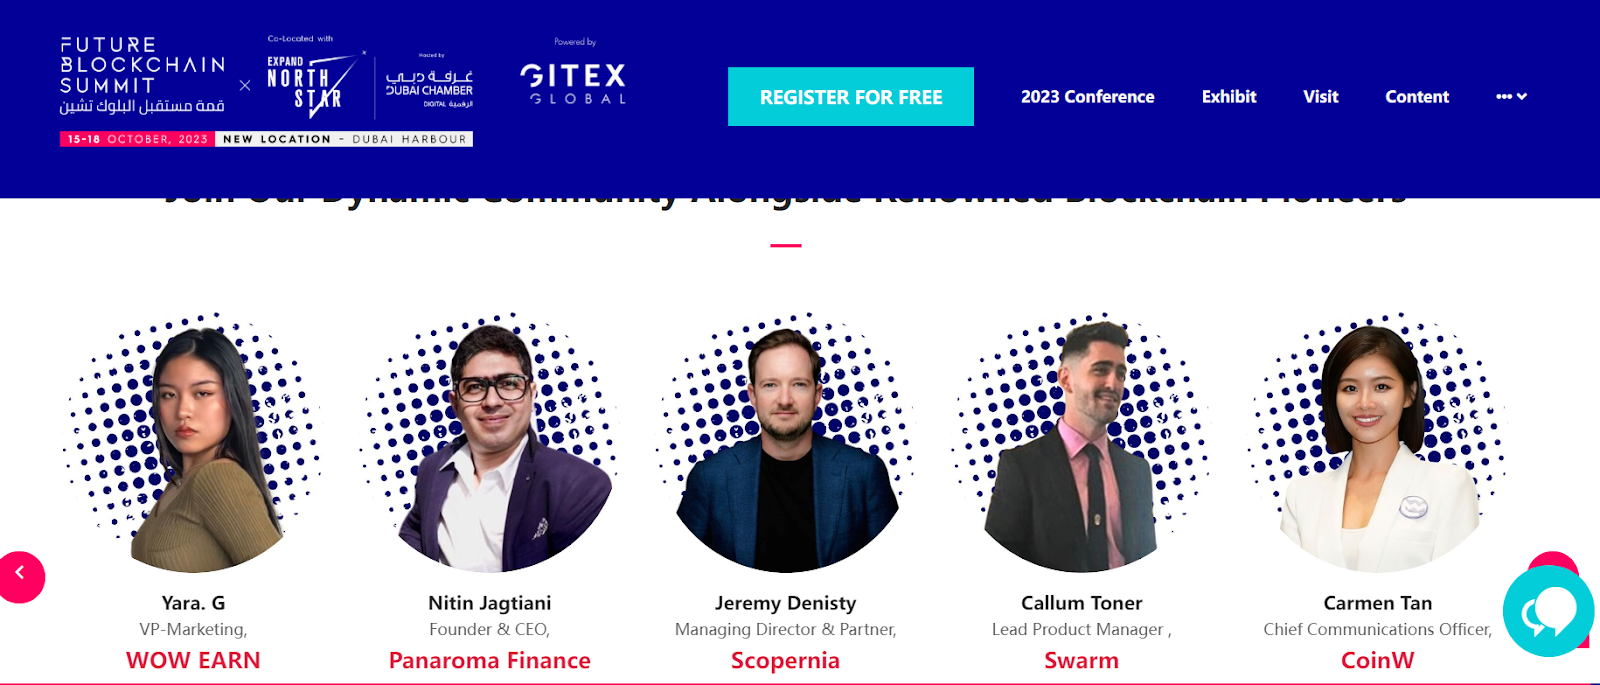 , CoinW to Attend Dubai GITEX and Future Blockchain Summit to Kick Off Its Sixth Anniversary Global Tour